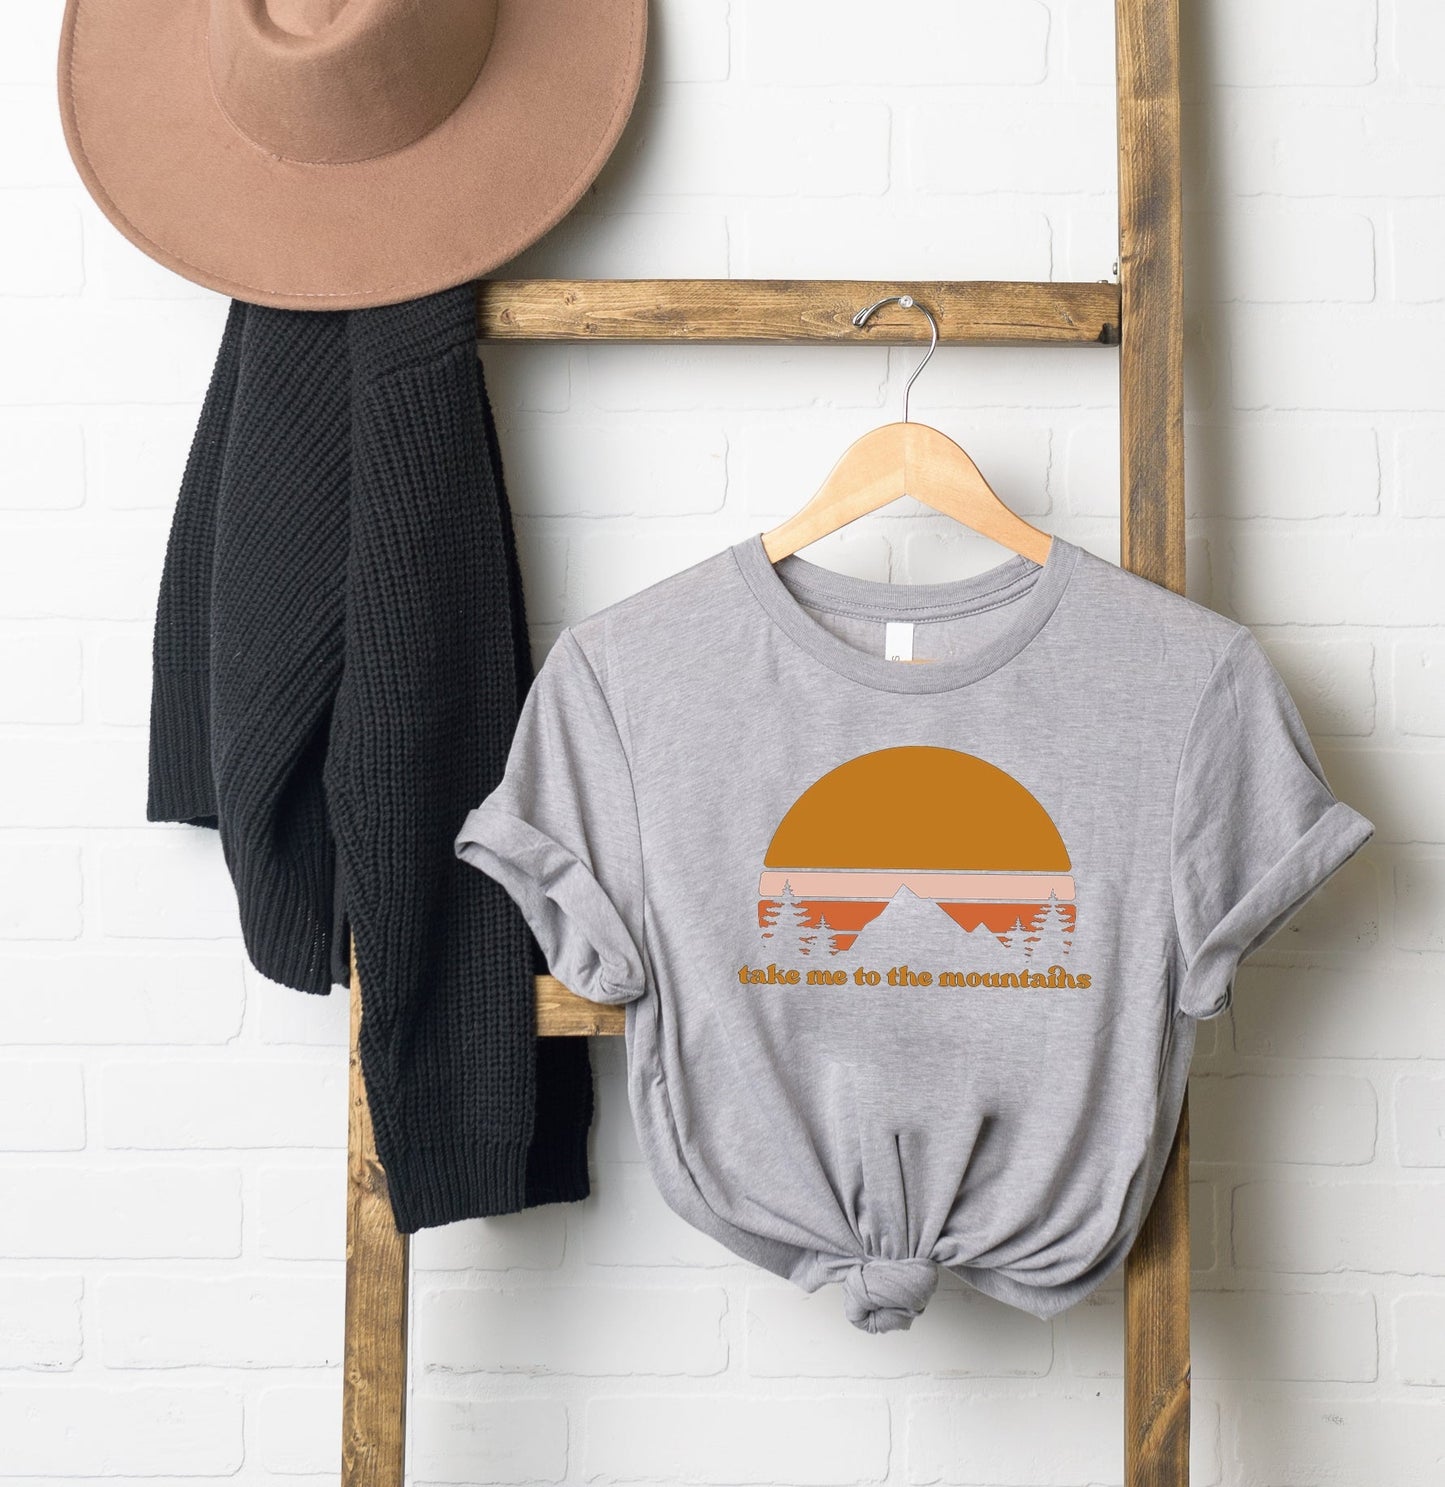 Take Me To The Mountains Sunset | Short Sleeve Crew Neck